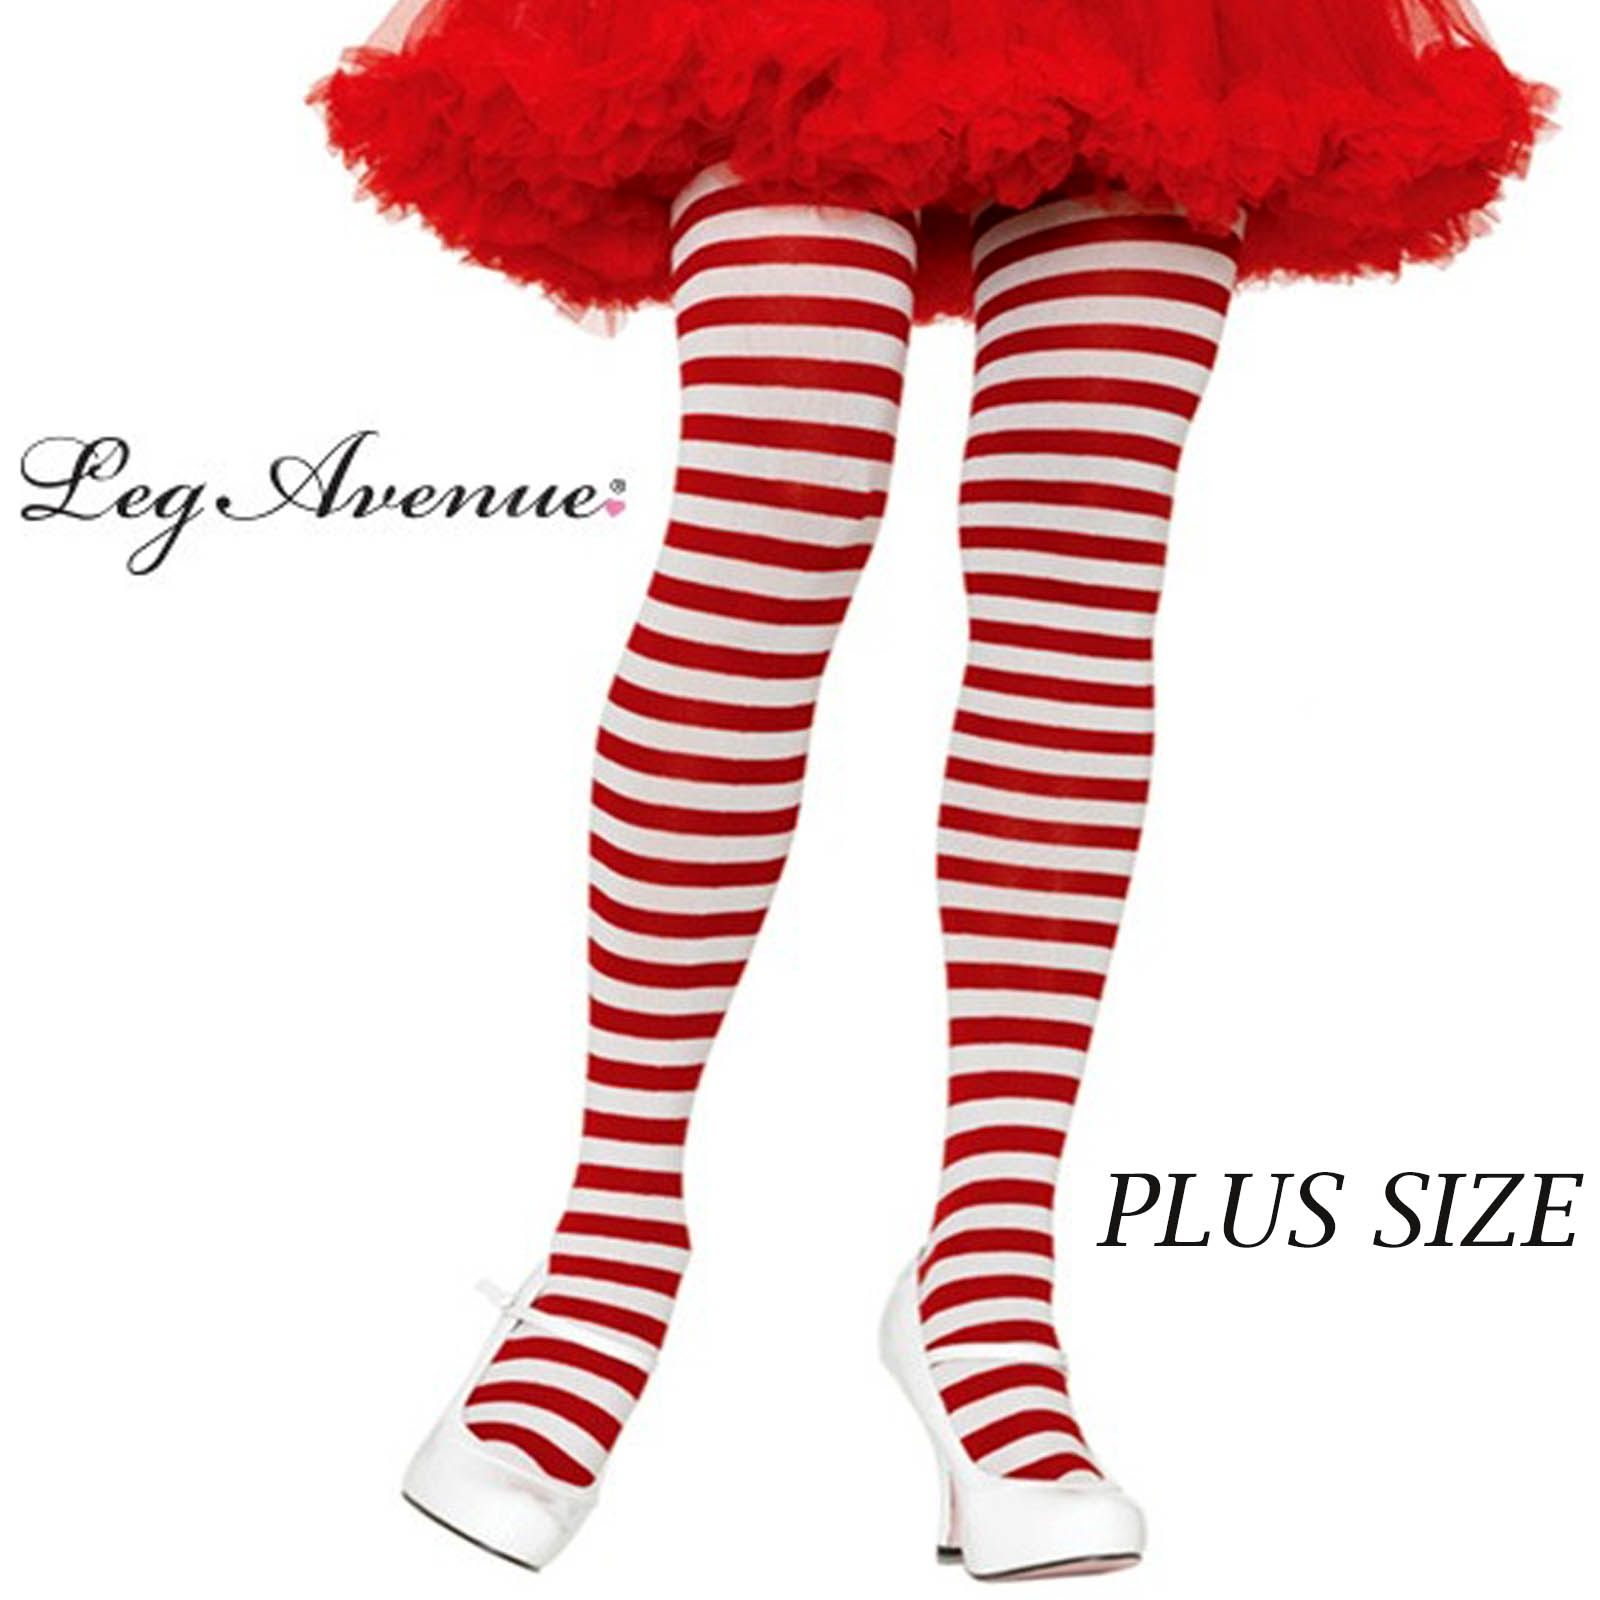 Tights - Adult - Stripe Tights Plus - White & Red 3X-4X